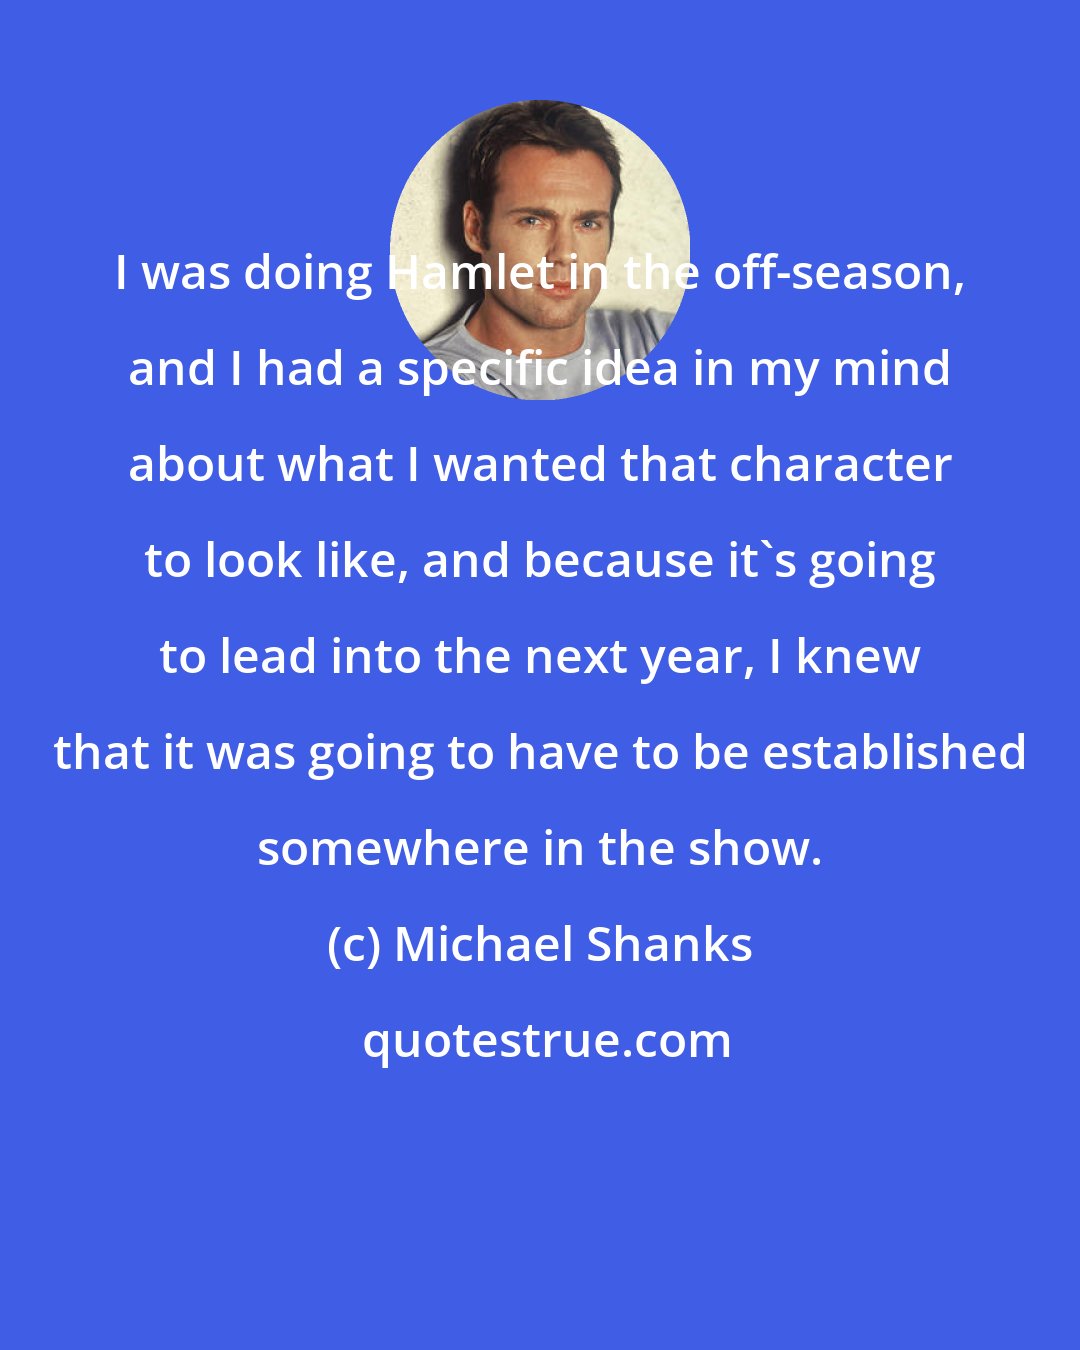 Michael Shanks: I was doing Hamlet in the off-season, and I had a specific idea in my mind about what I wanted that character to look like, and because it's going to lead into the next year, I knew that it was going to have to be established somewhere in the show.